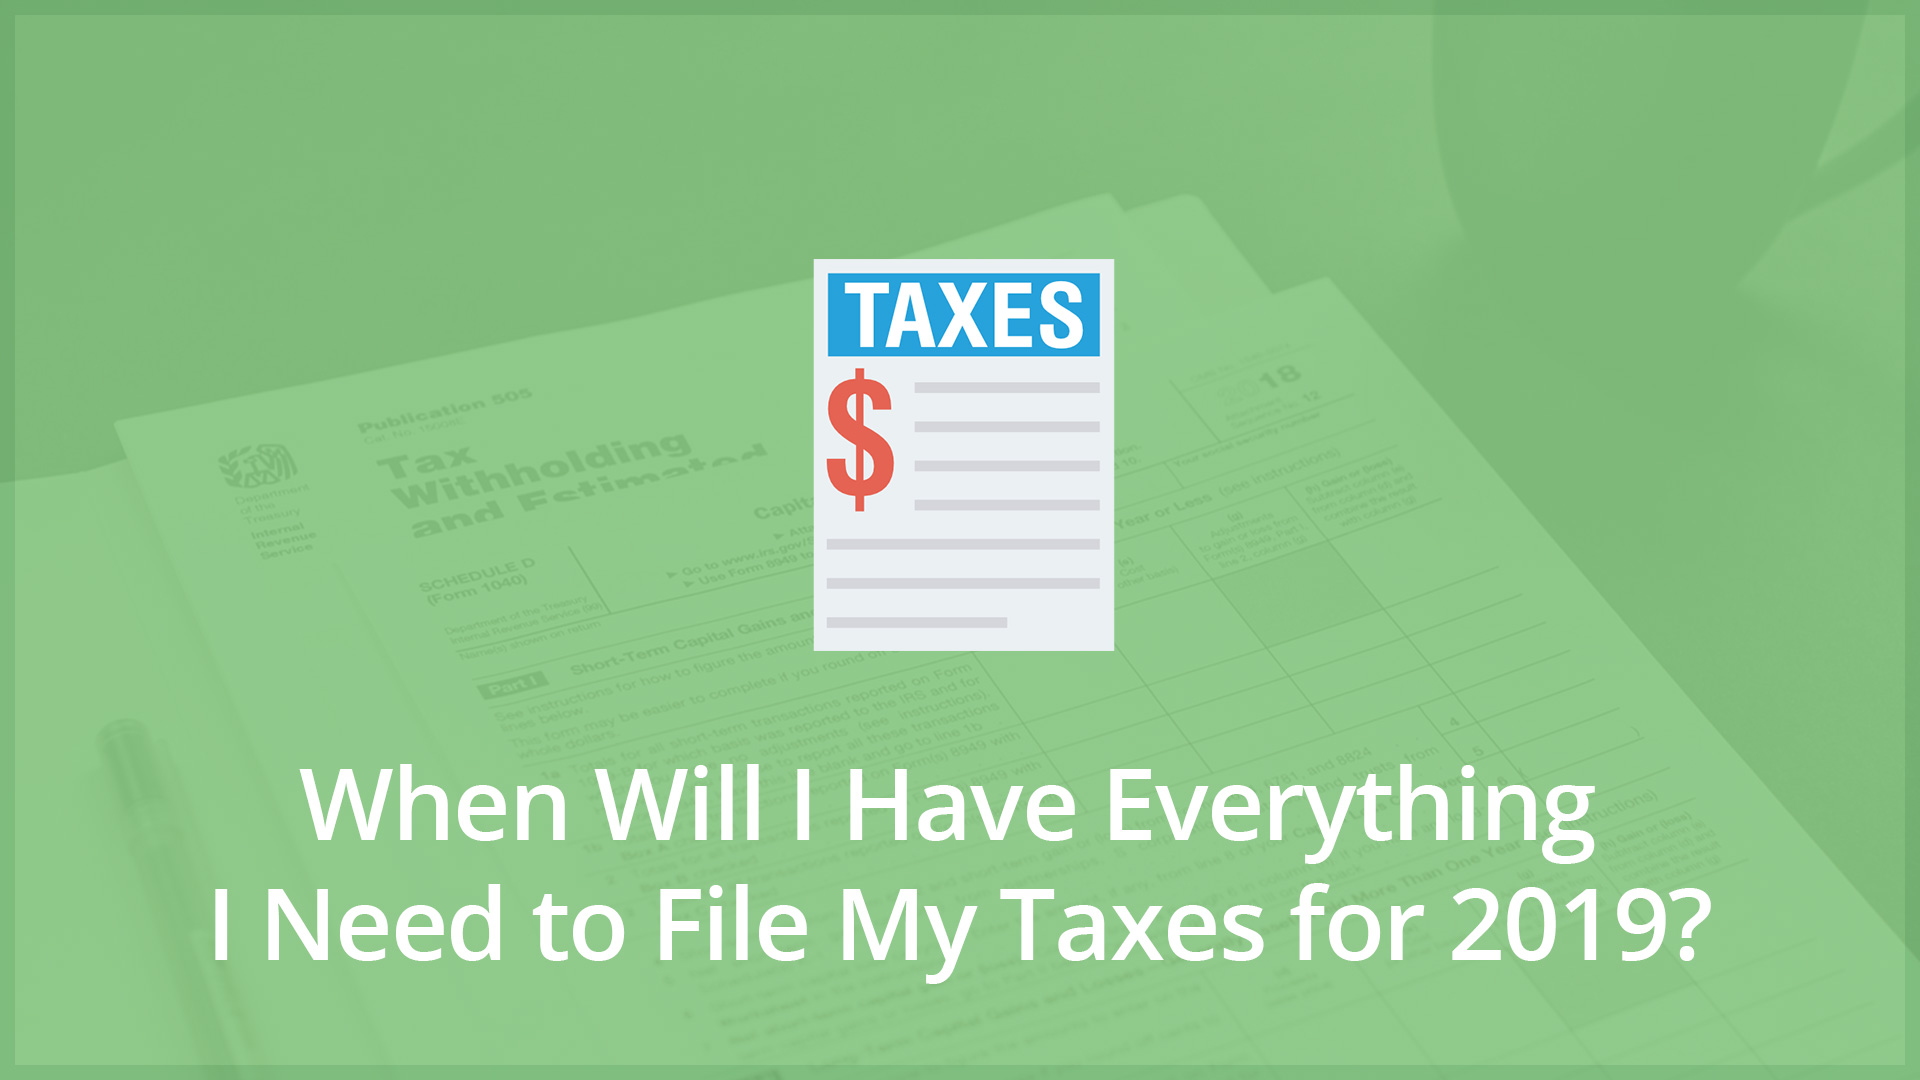 When fill I have Everything I Need to File My Taxes for 2019?